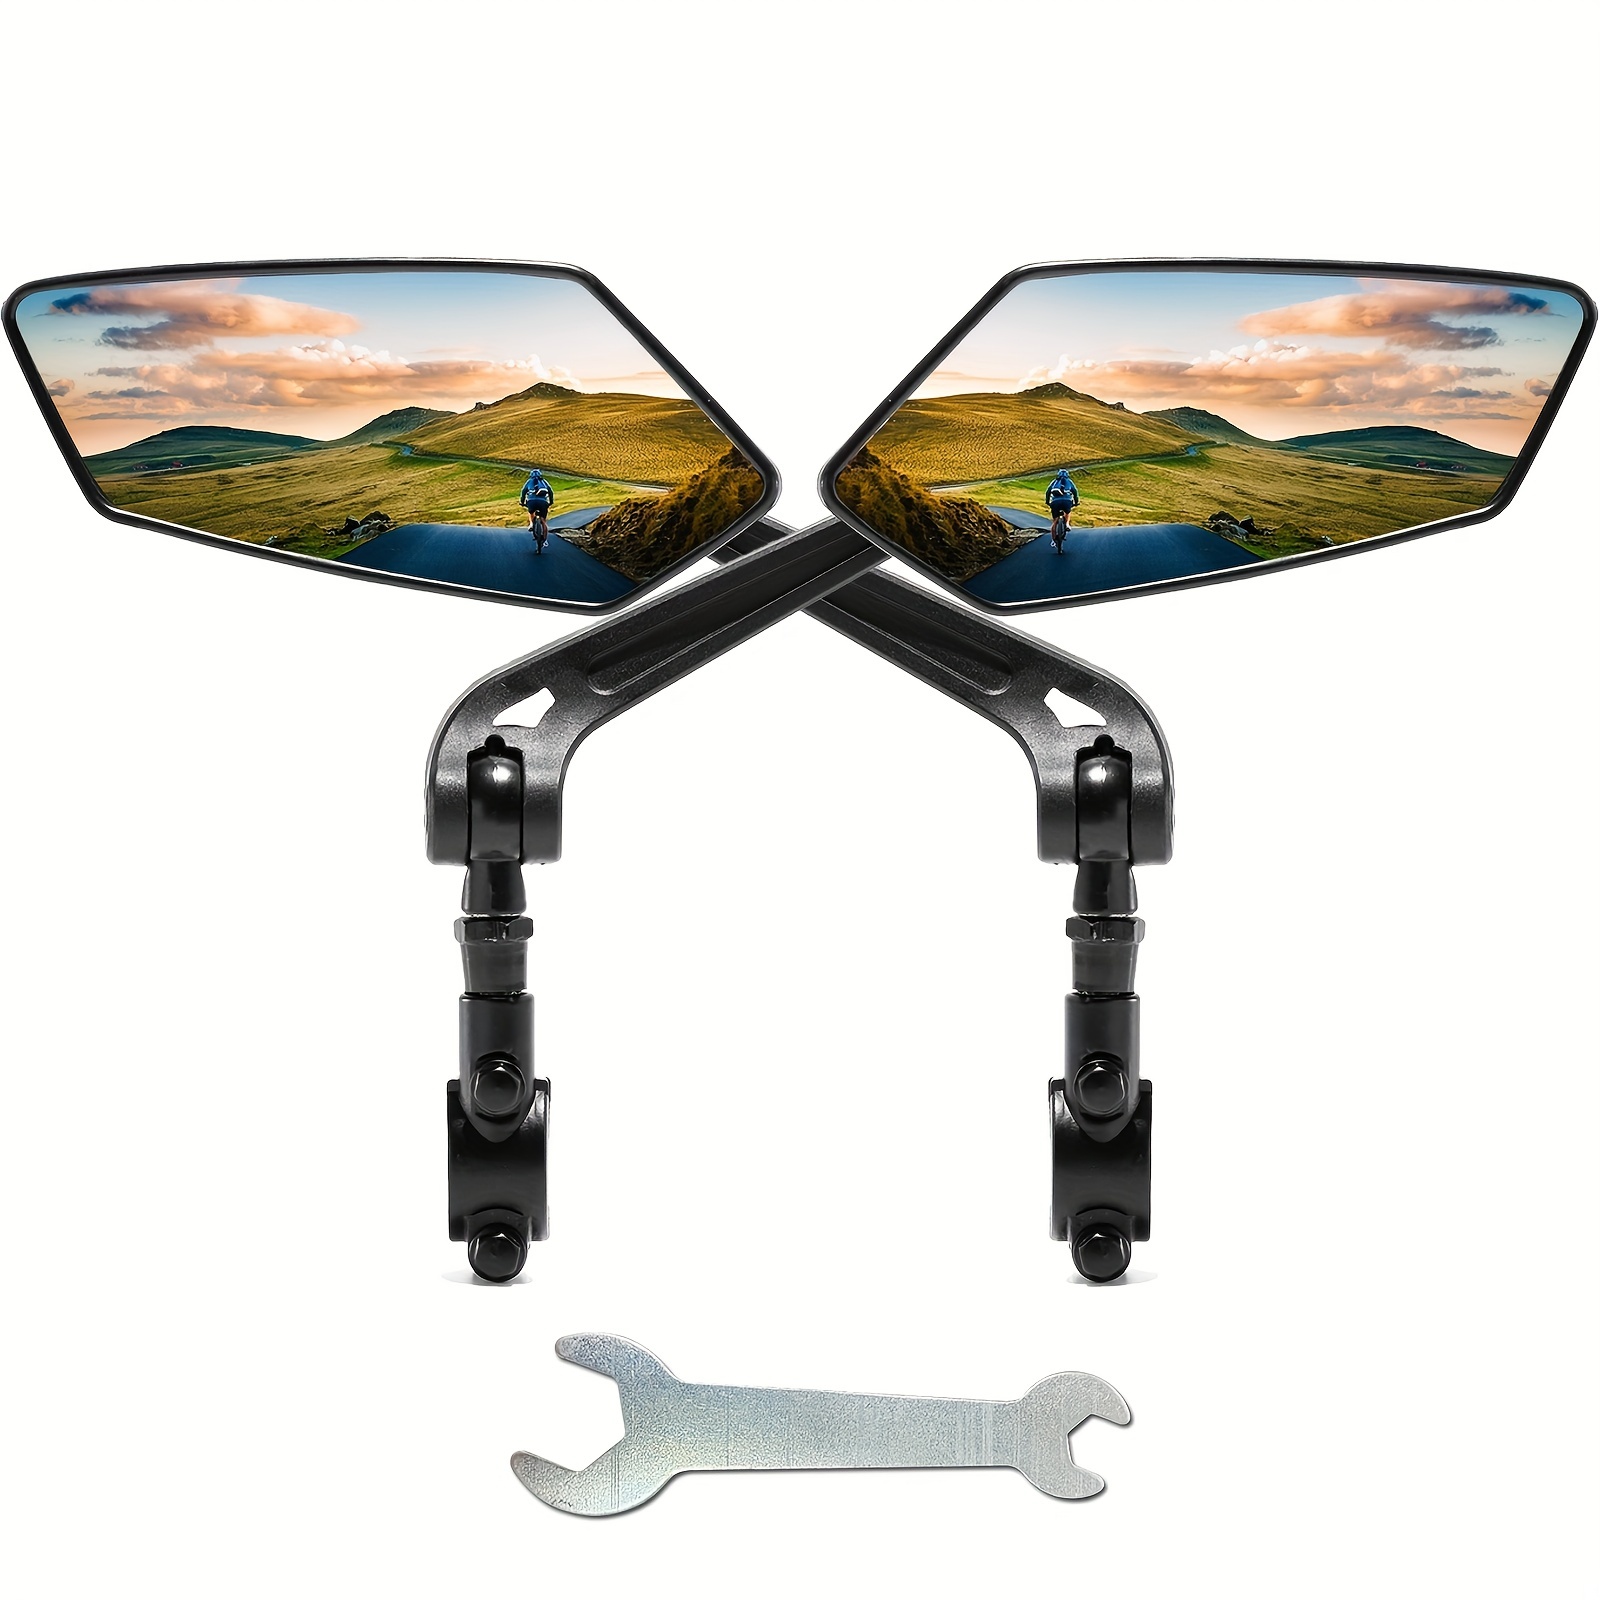 

2pcs Bike Handlebar Mirrors - Adjuatable Wide Angle Rear View & 360° Rotatable Safety Glass Design - Perfect For Bicycle, E-bike, Scooter & Snowbike!